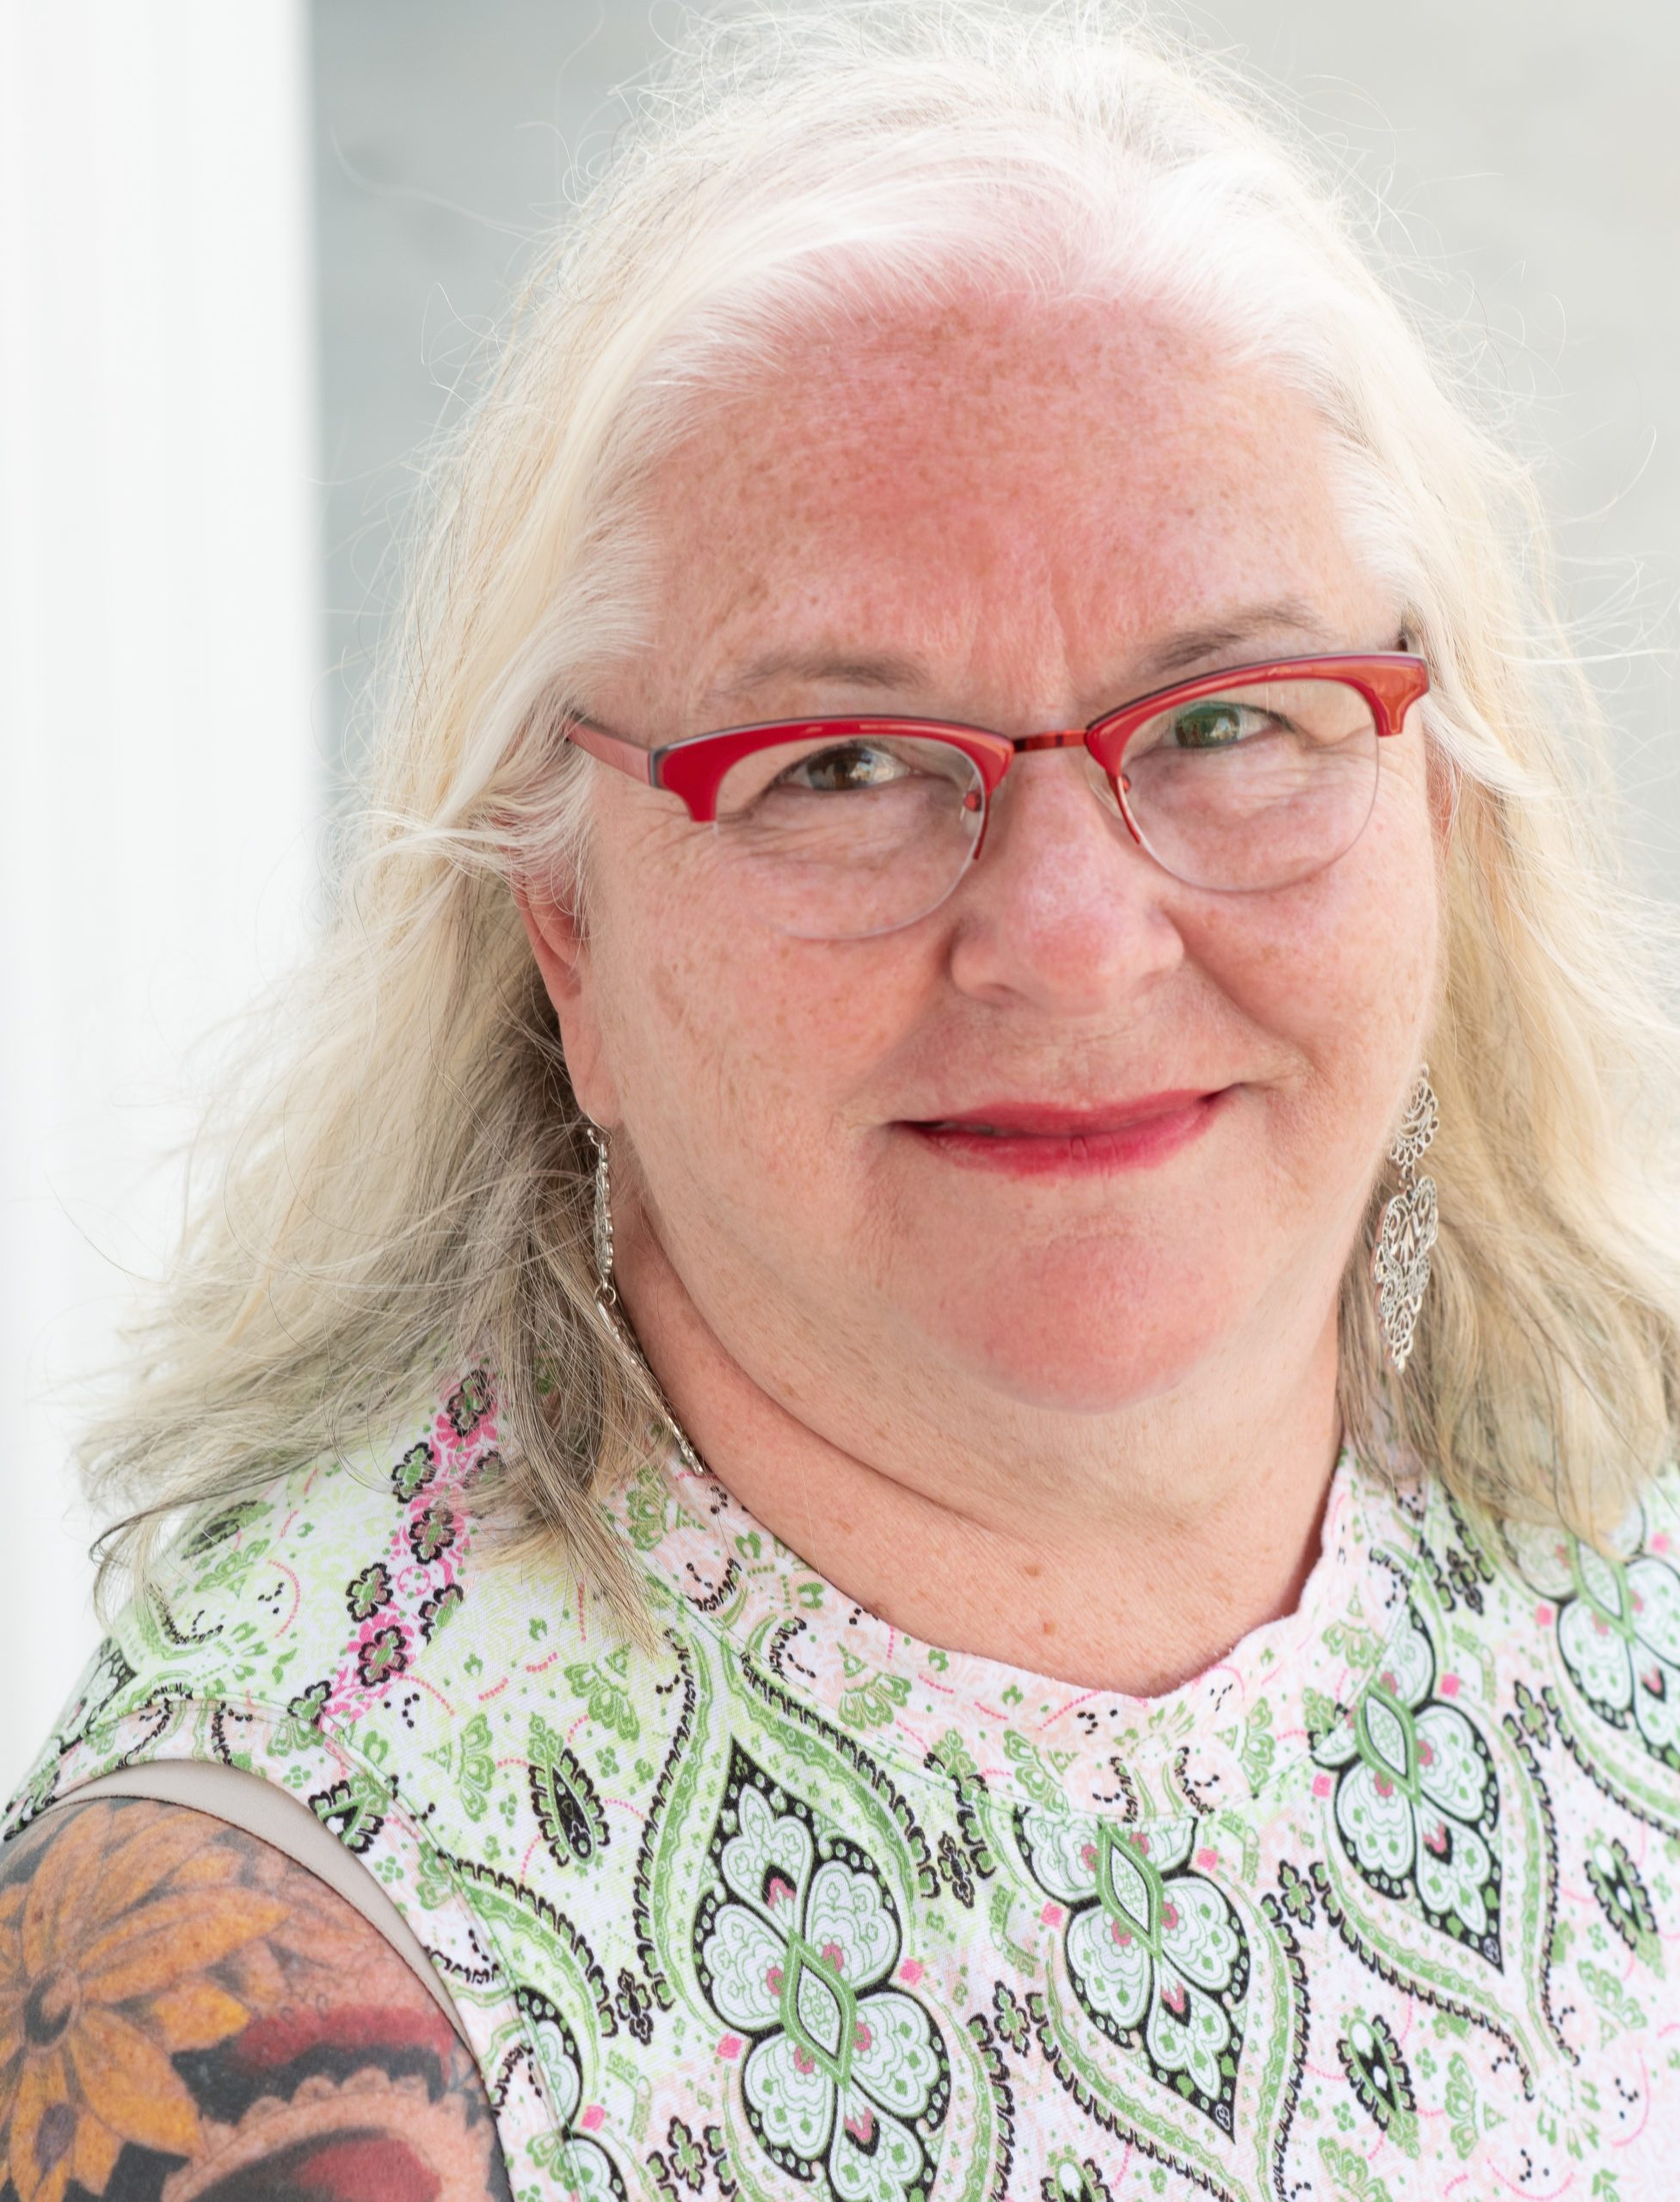 Deb Brown, a white woman with long white hair, poses in front of a light background, wearing red glasses, red lipstick, and a green and white printed sleeveless top